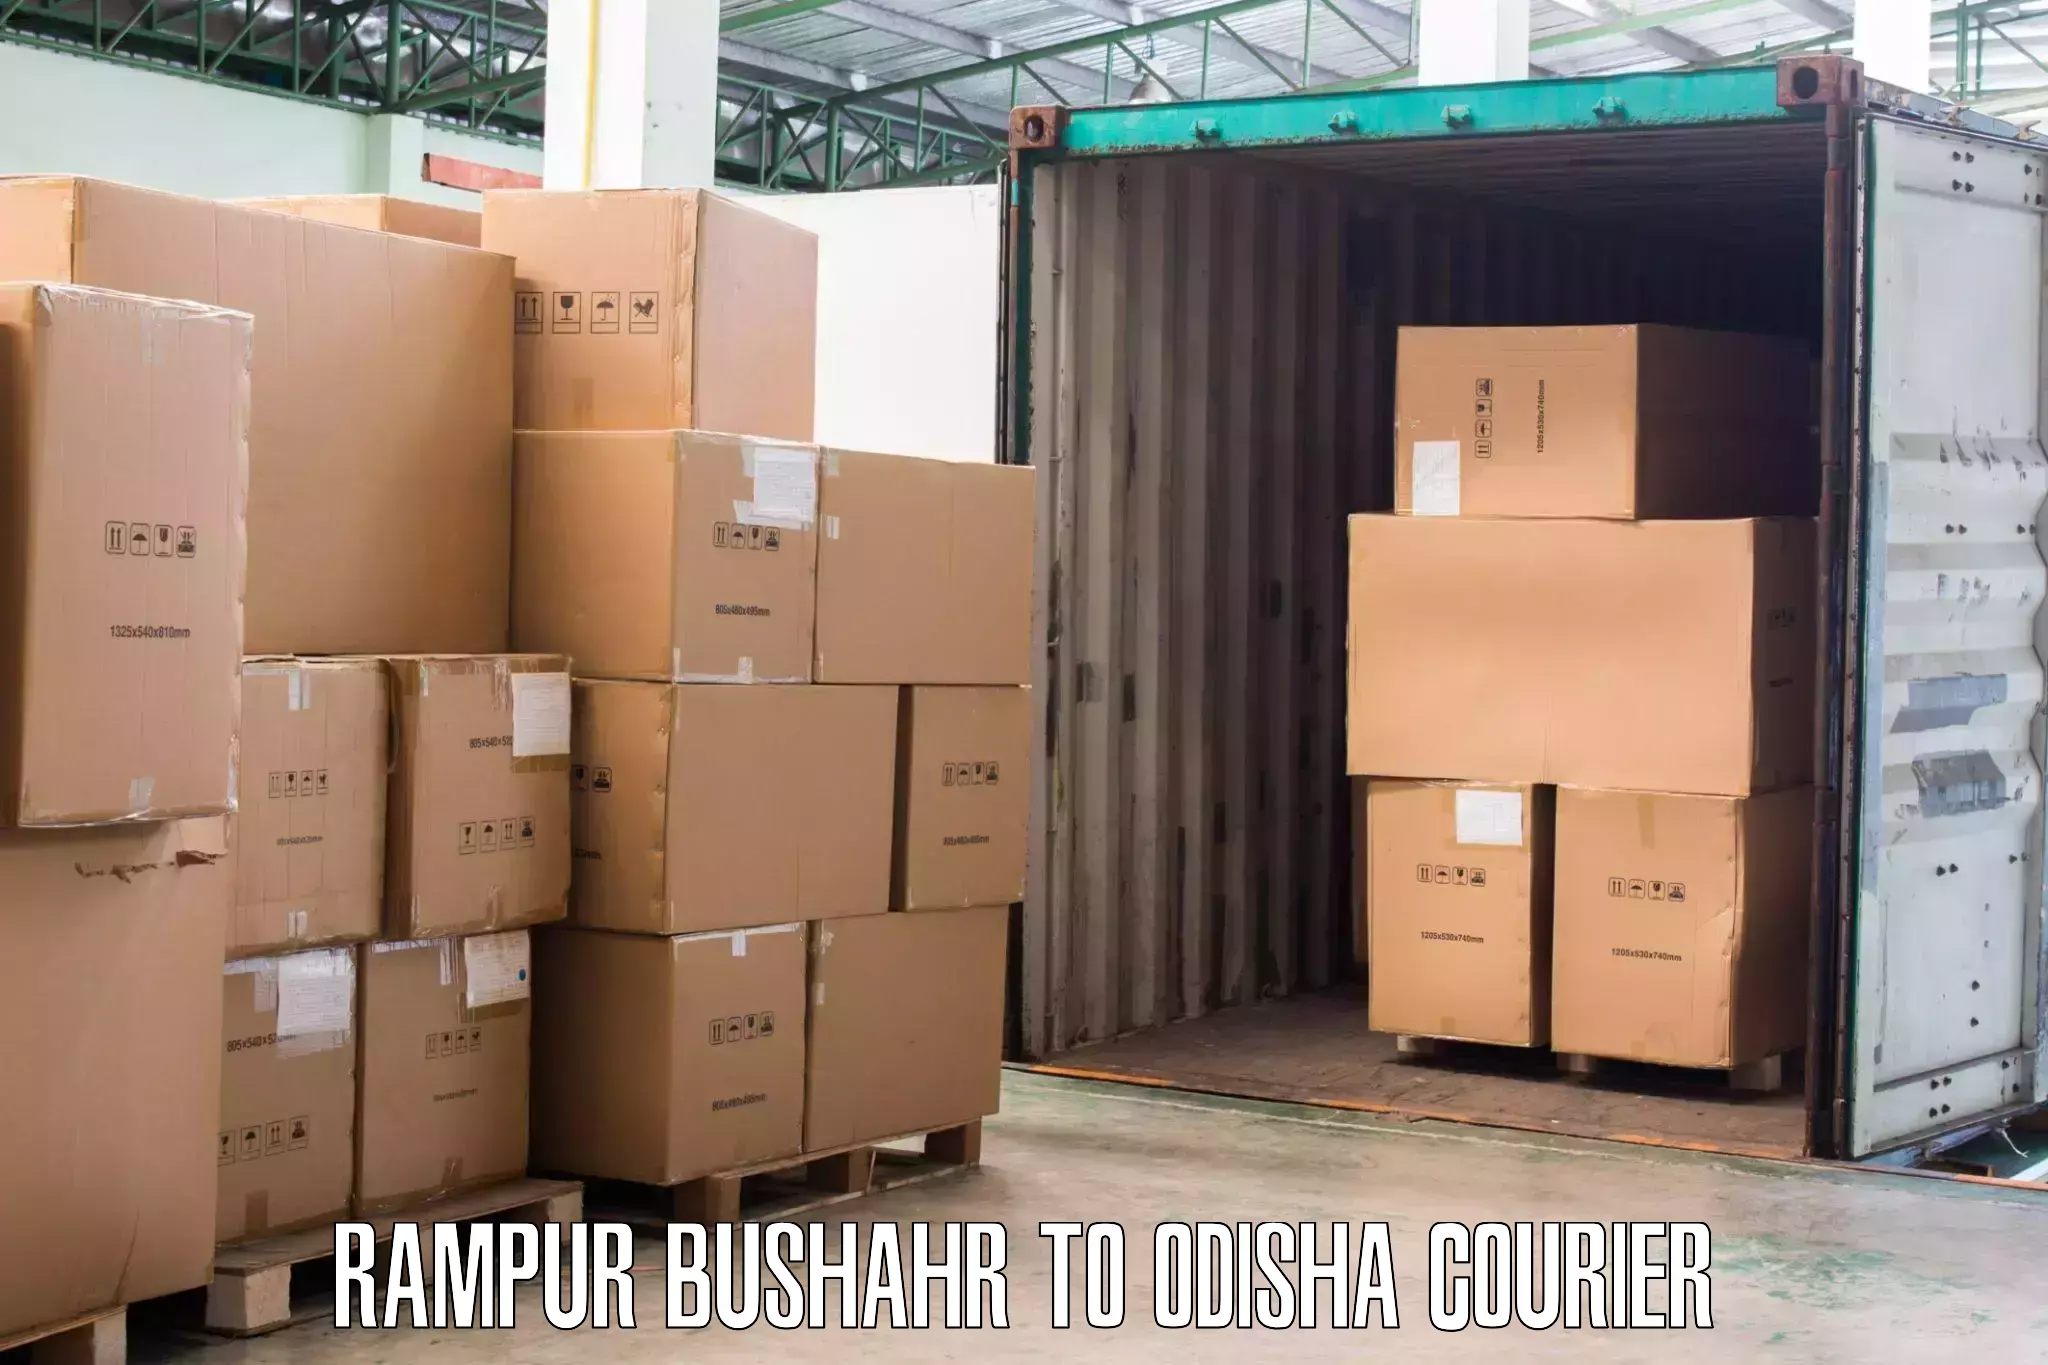 Specialized moving company Rampur Bushahr to Loisingha